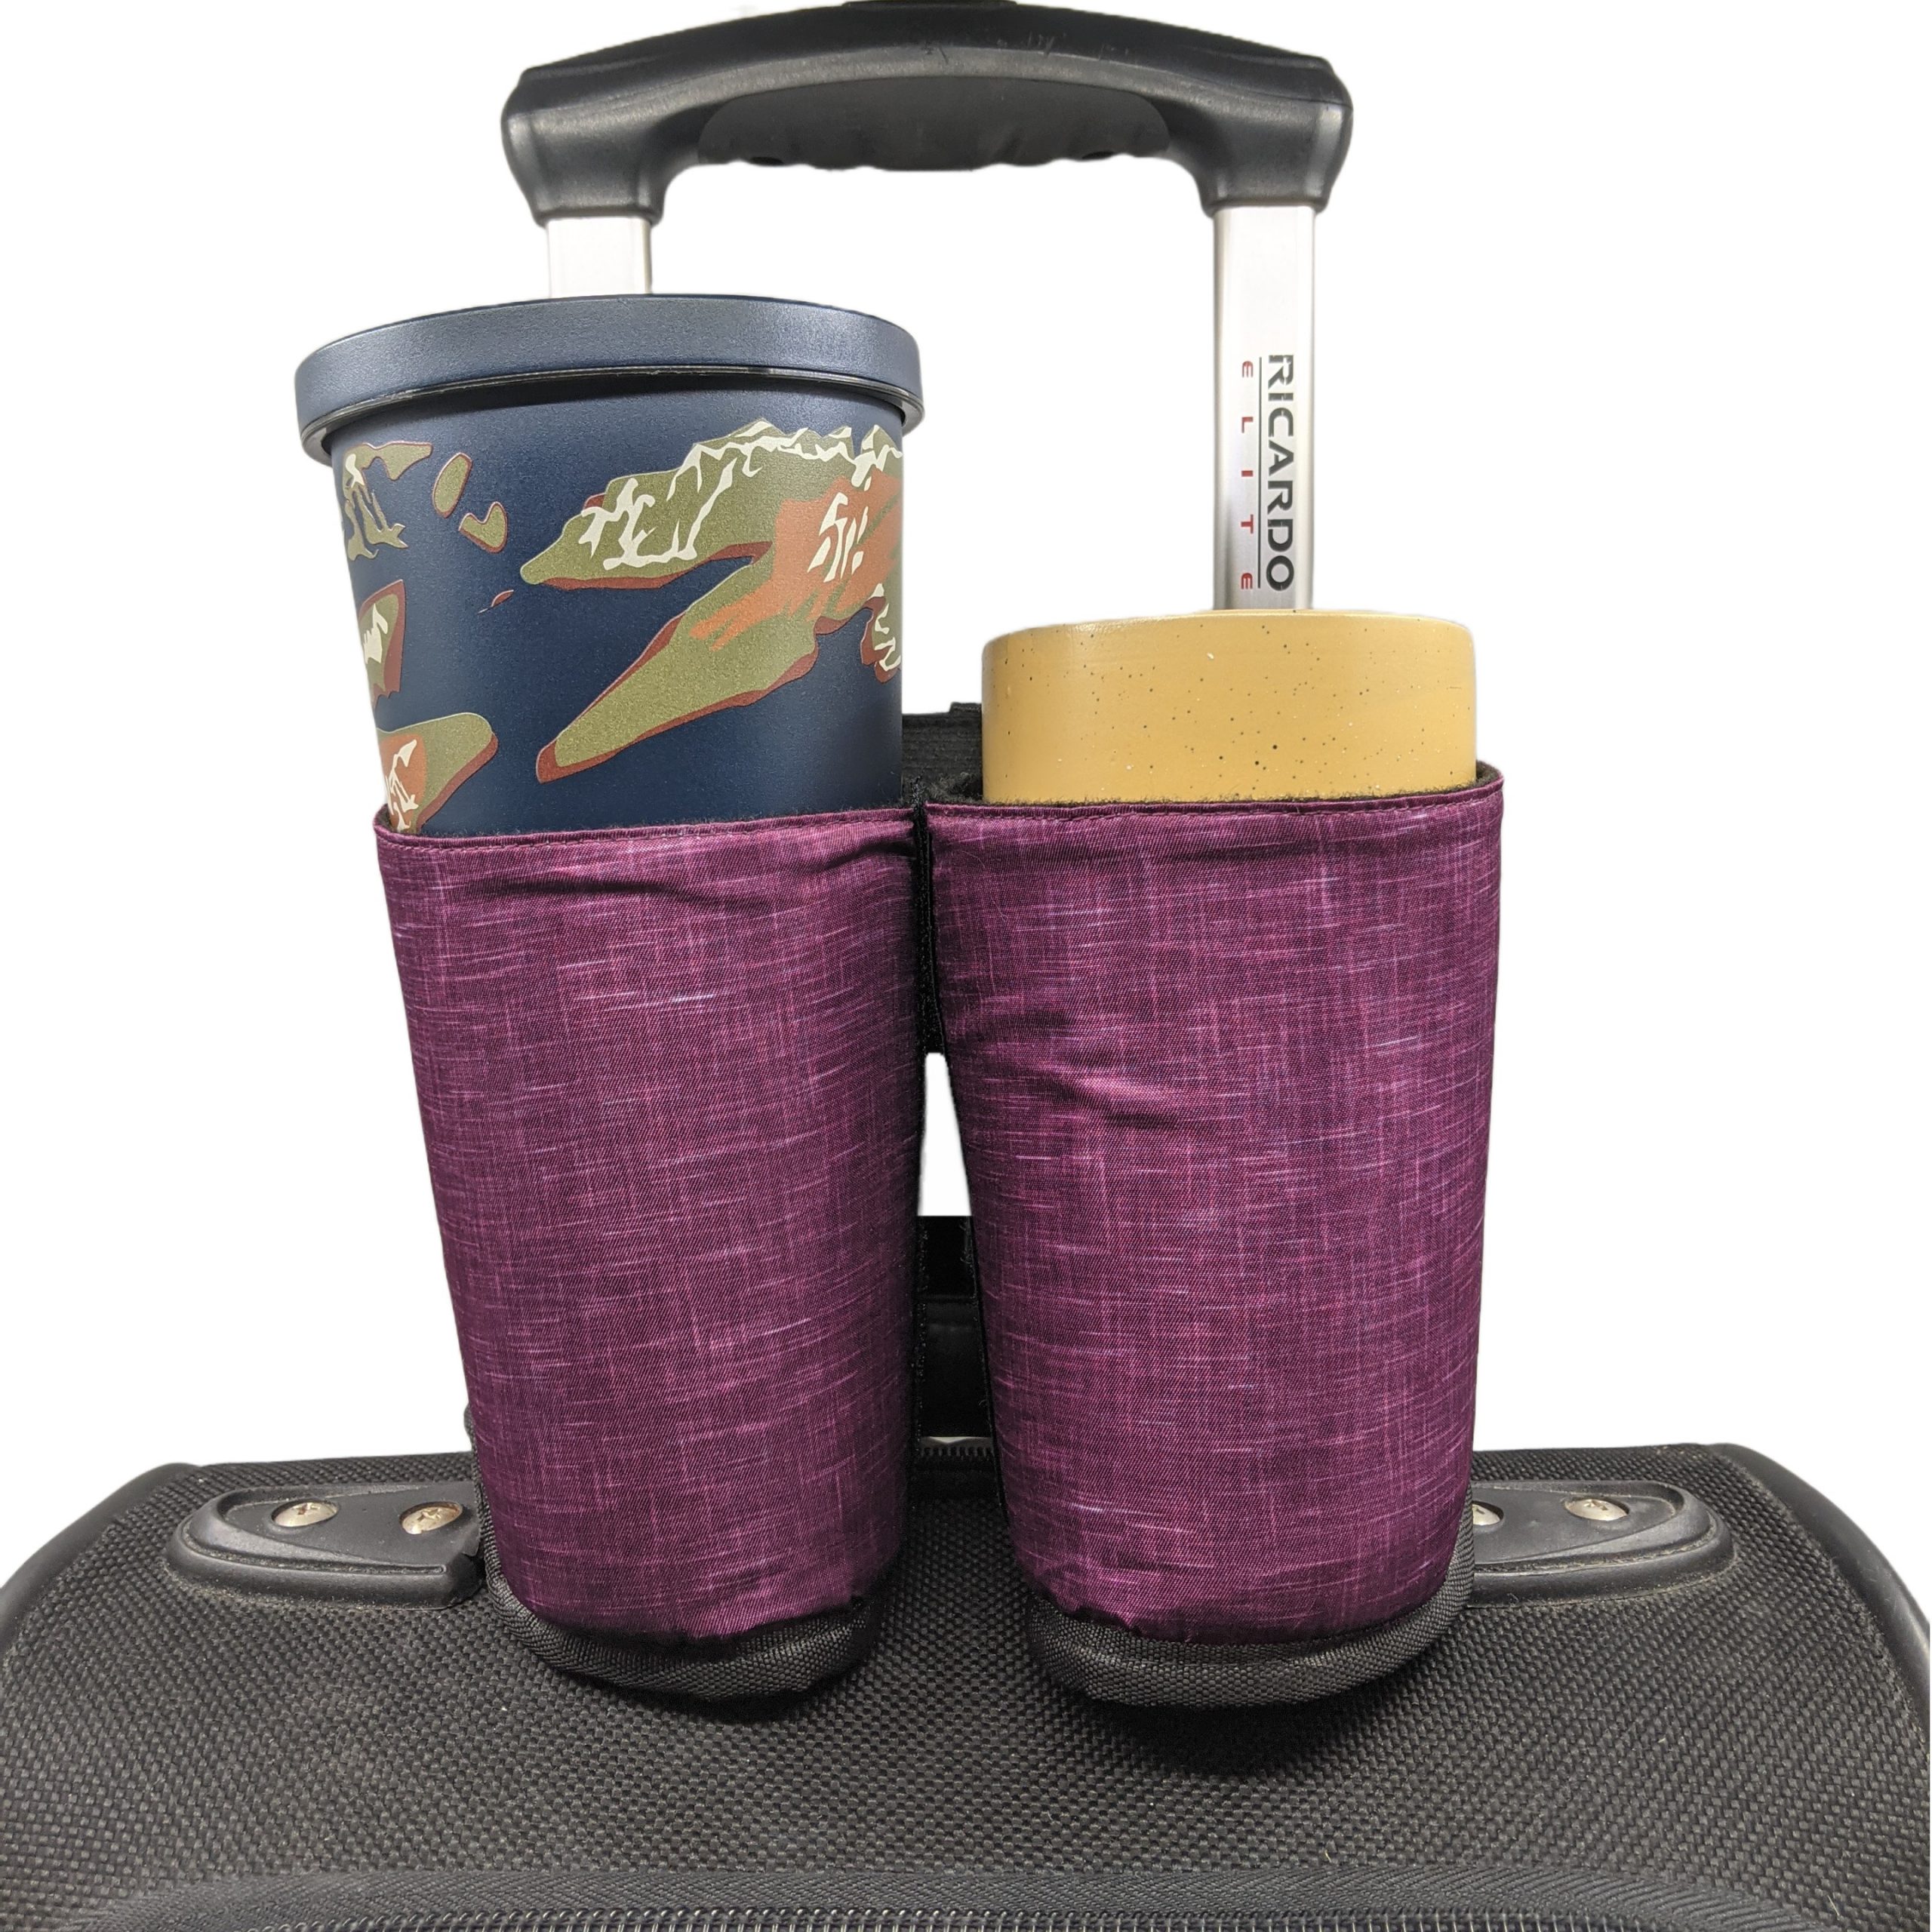  riemot Luggage Travel Cup Holder Free Hand Drink Caddy